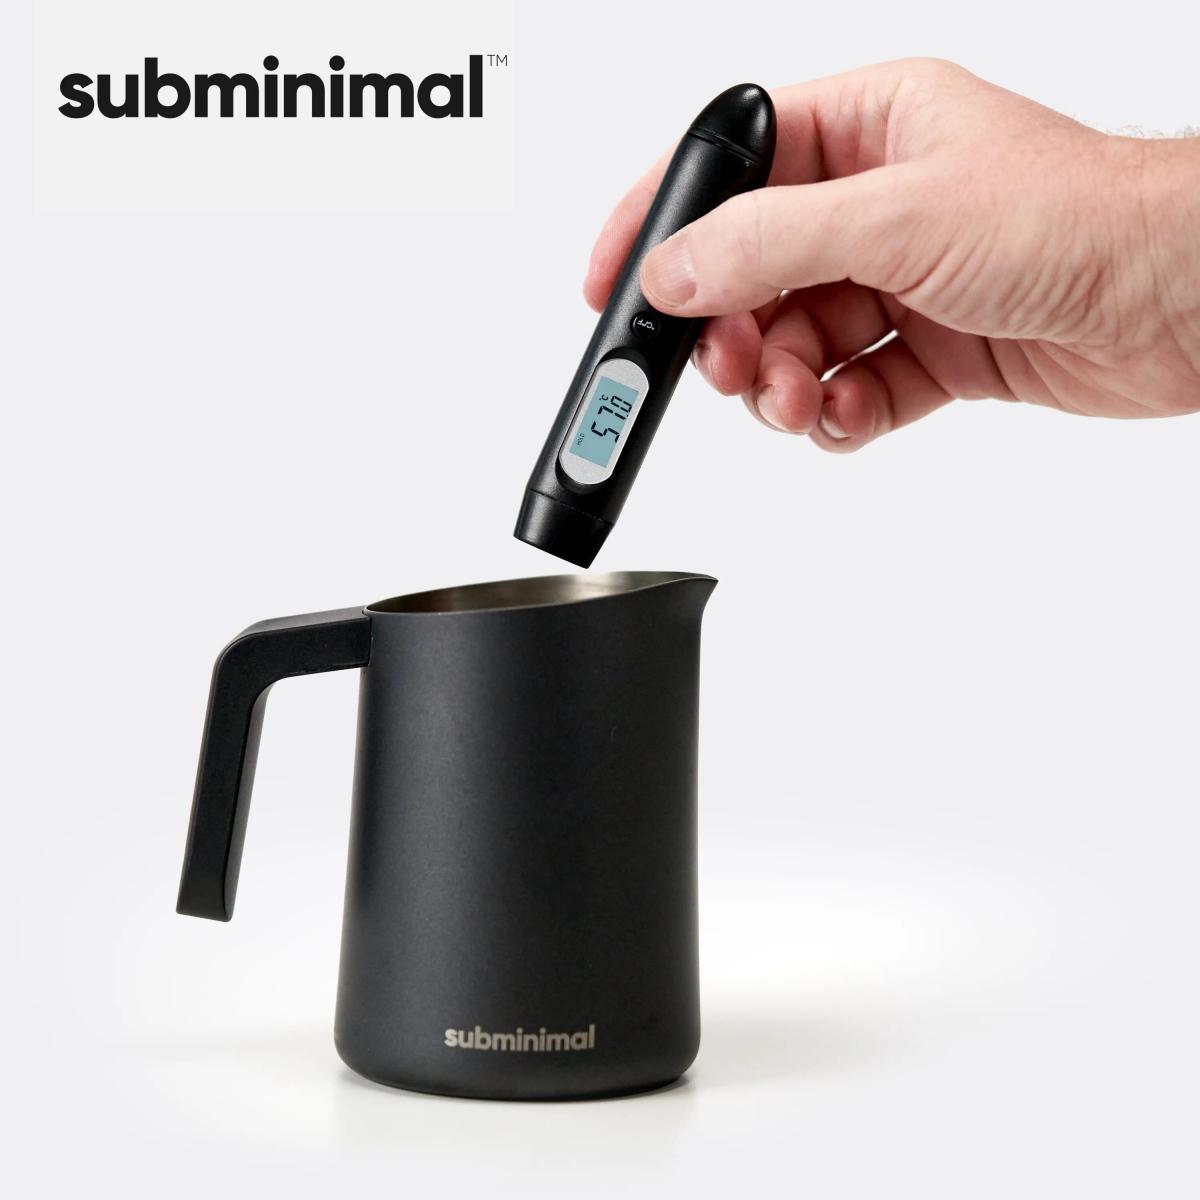 Subminimal - Contactless Thermometer Micro infrared thermometer｜Contact-free thermometer｜Special thermometer for coffee latte art